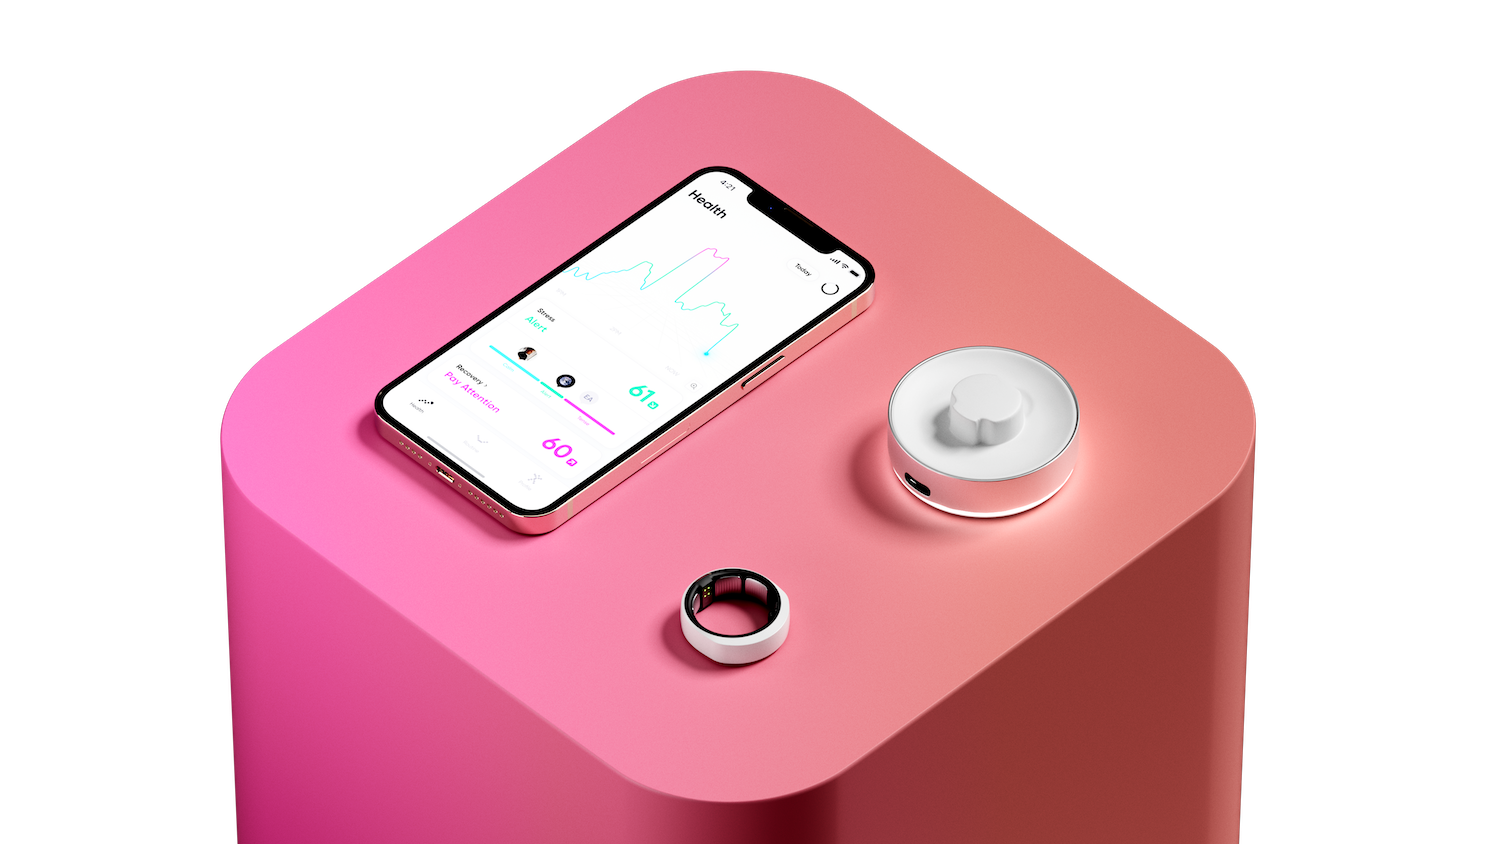 The Happy Ring, pictured with its charger and smartphone app.